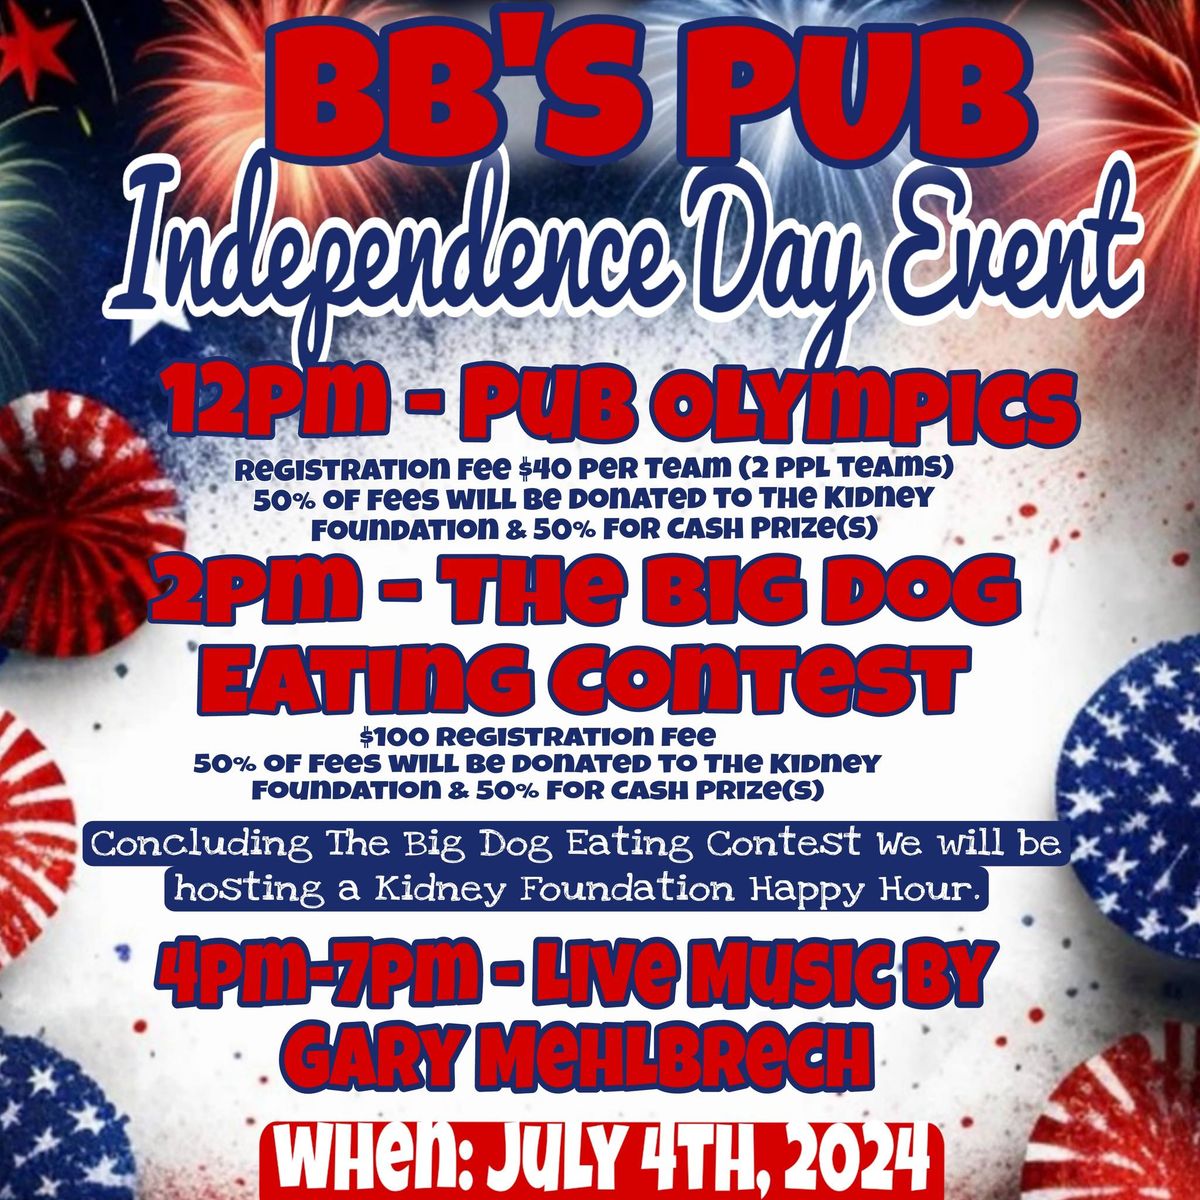 INDEPENDENCE DAY EVENT